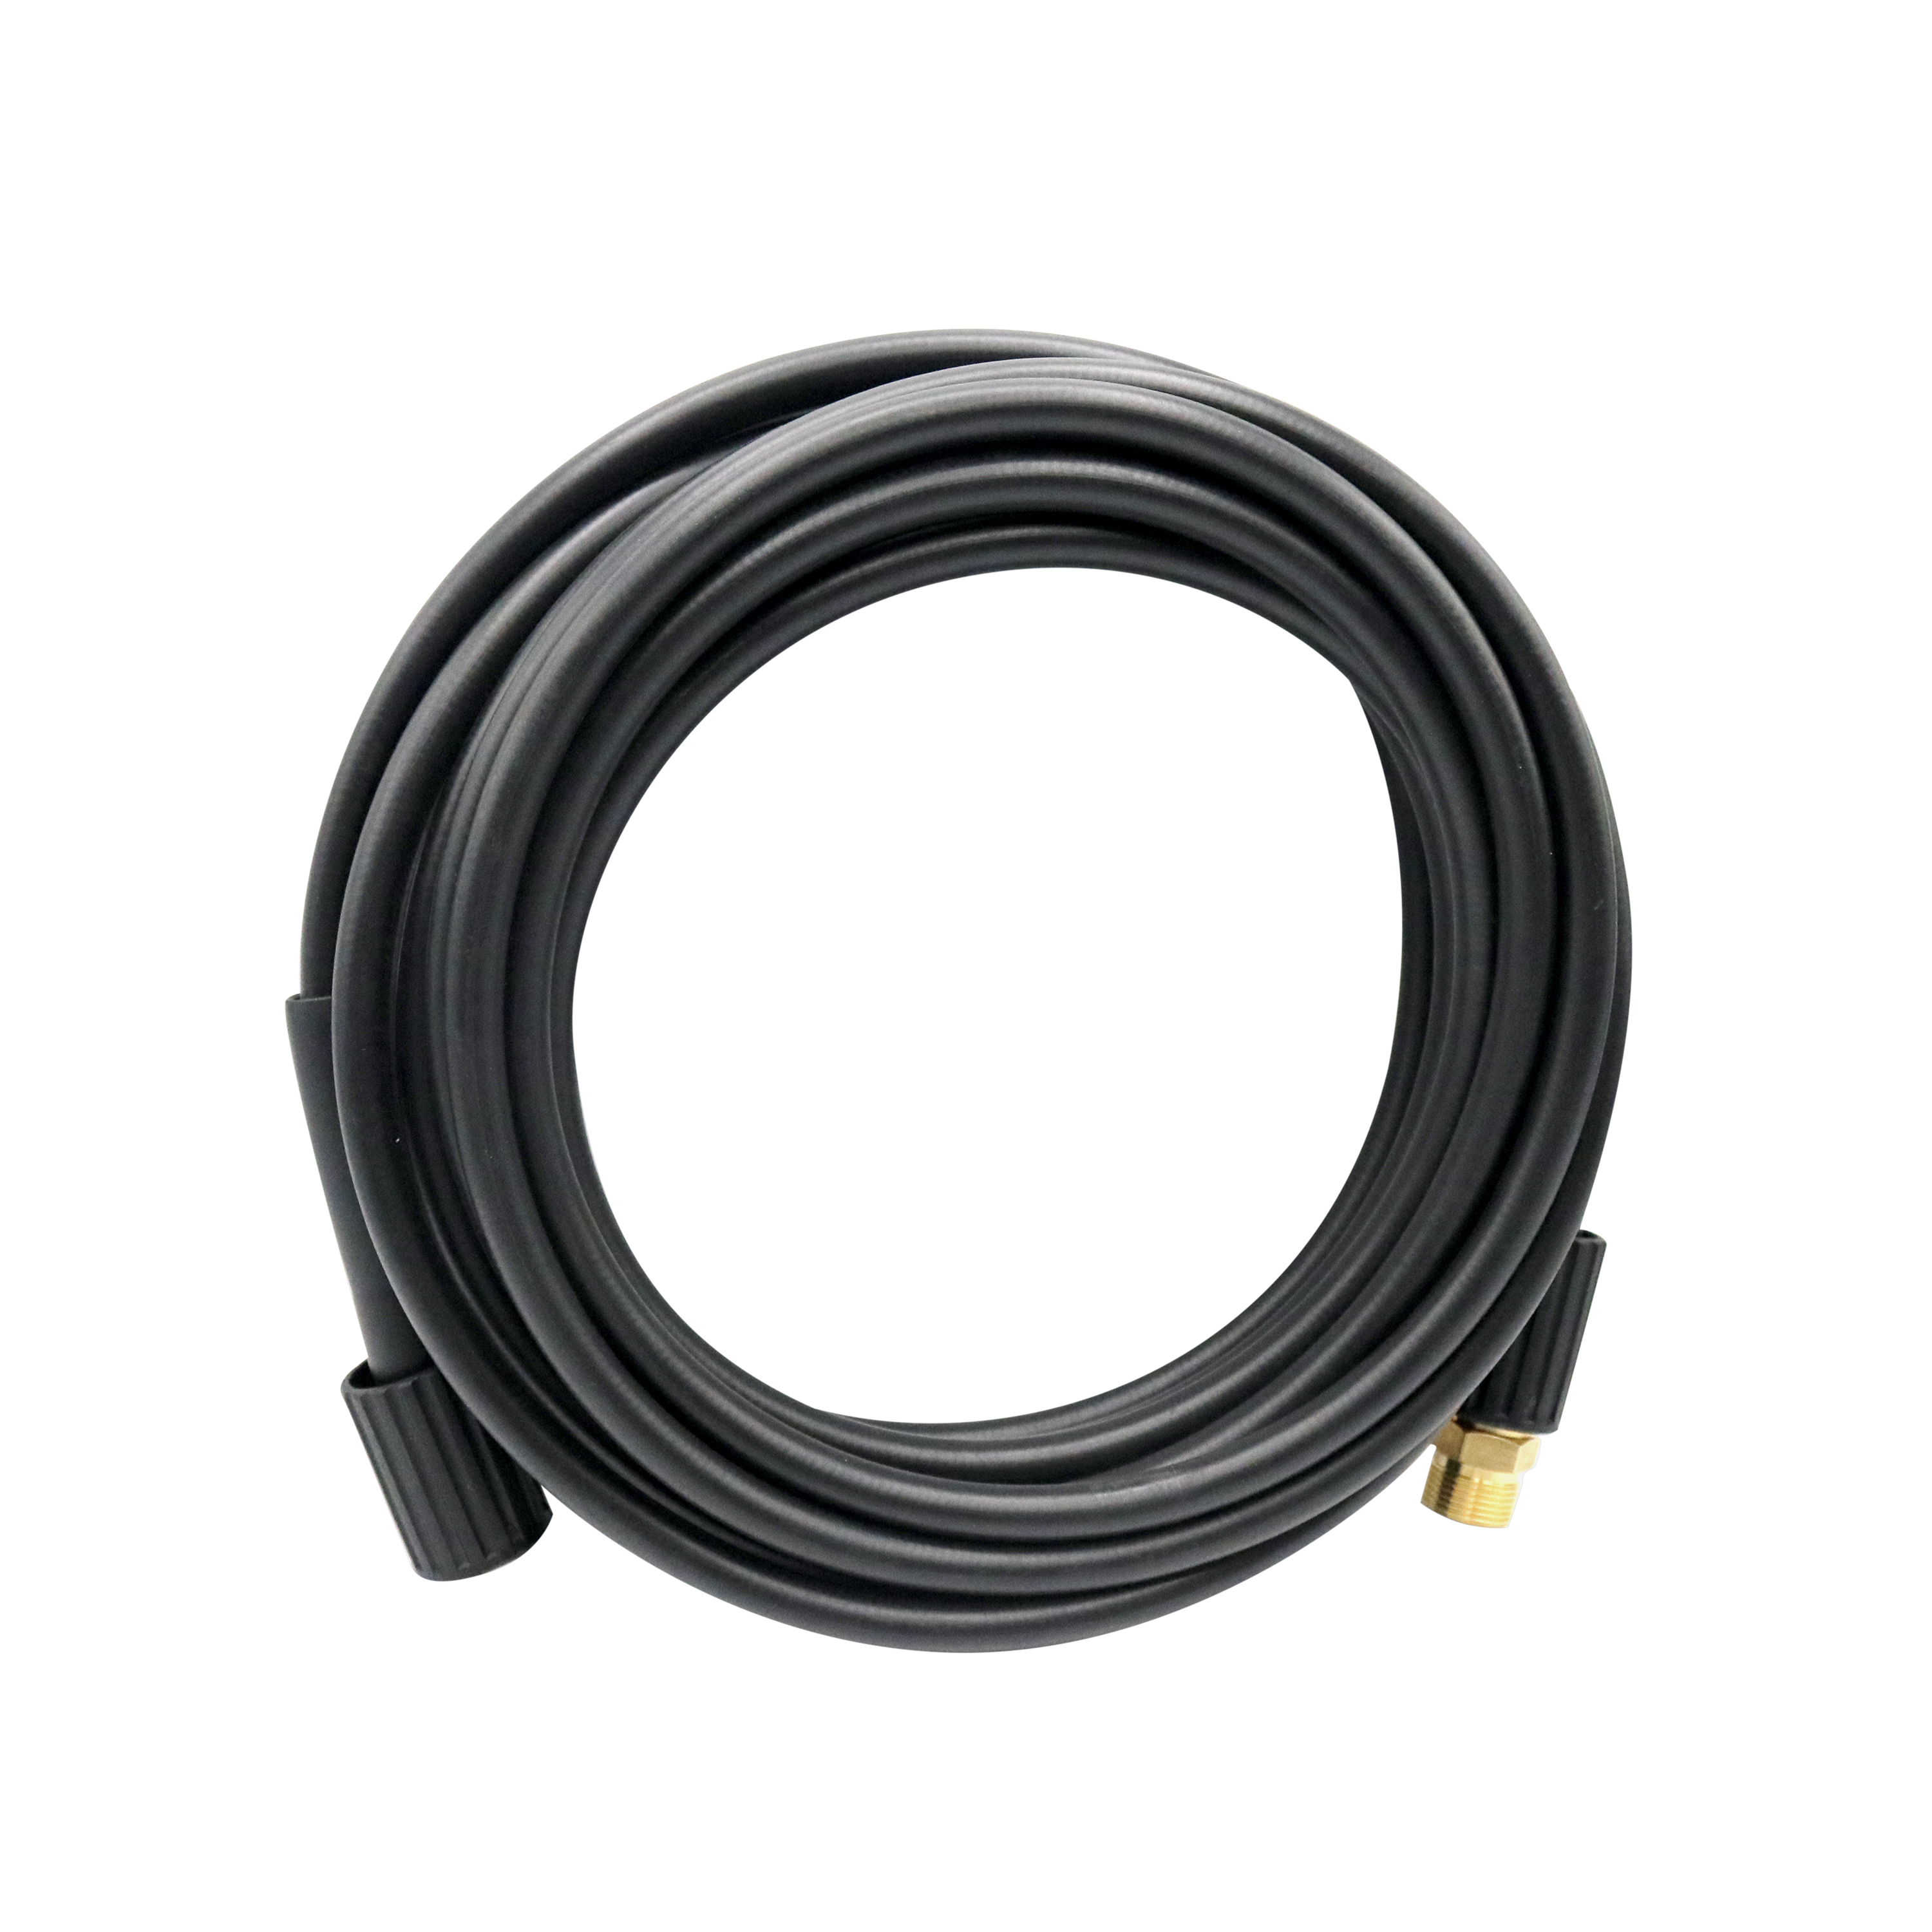 Sun Joe SPX-25H 25 Universal Pressure Washer Extension Hose for SPX Series and Others 